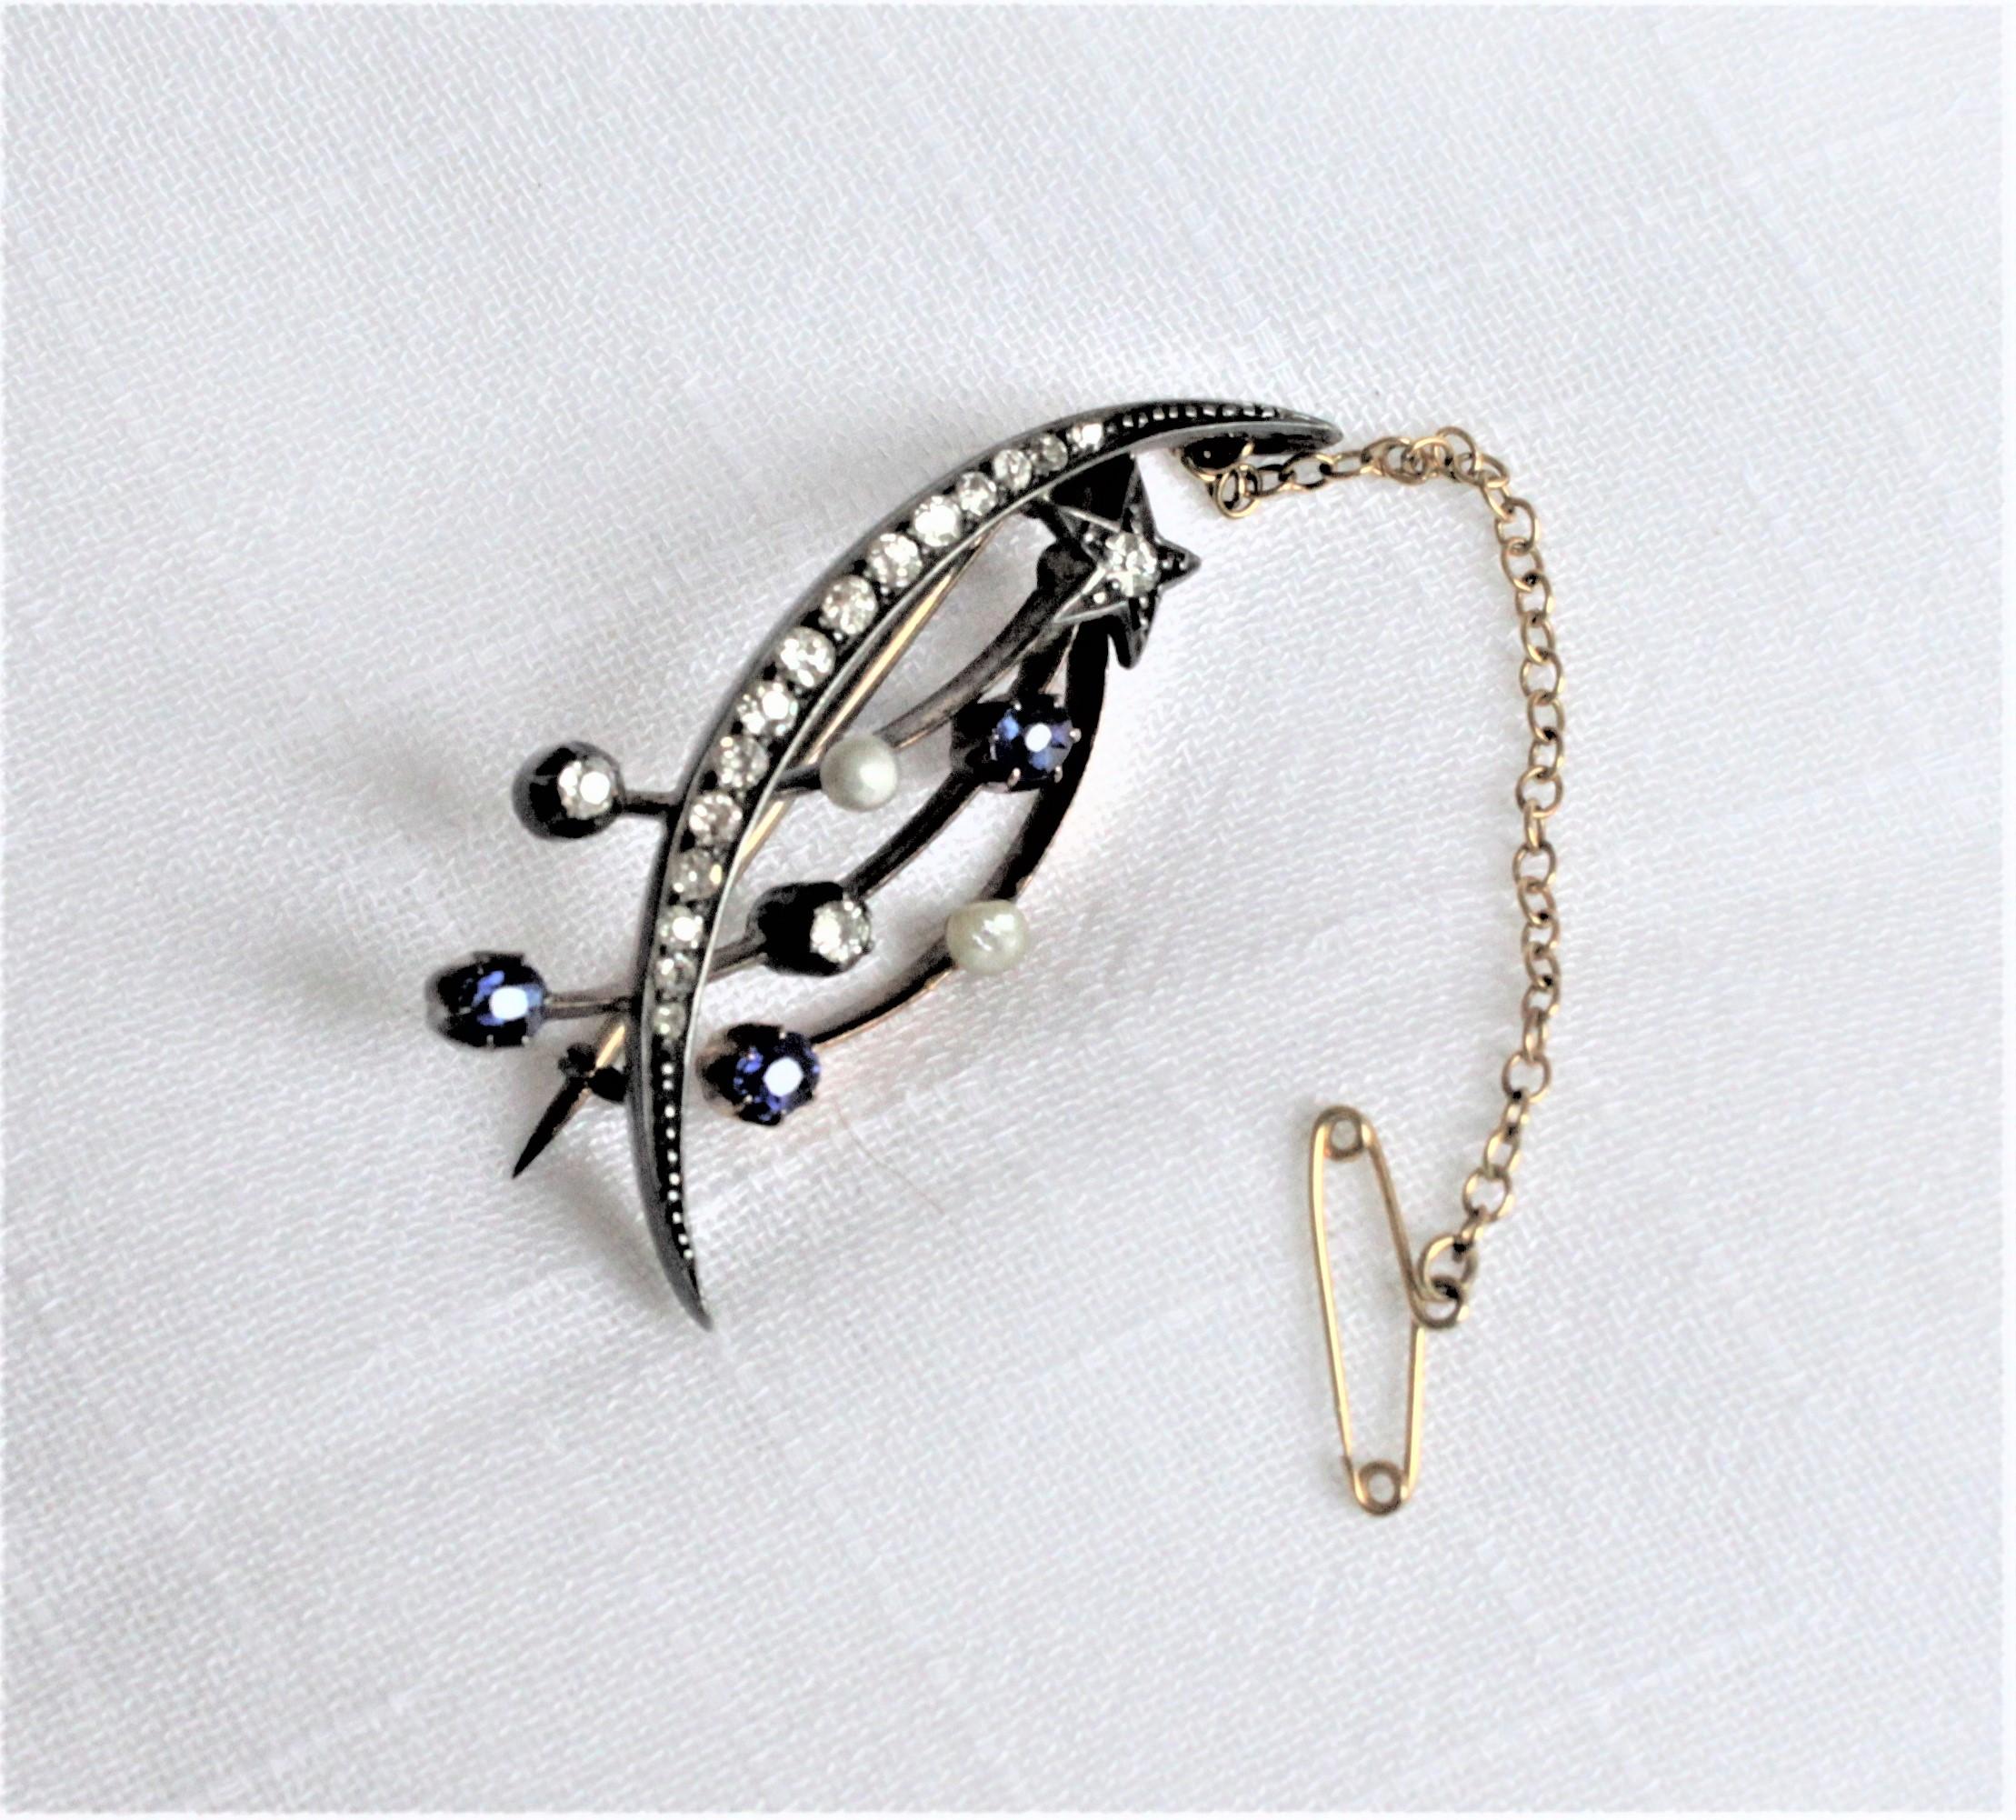 High Victorian Antique Victorian Gold, Silver, Diamond & Sapphire Shooting Star or Comet Brooch